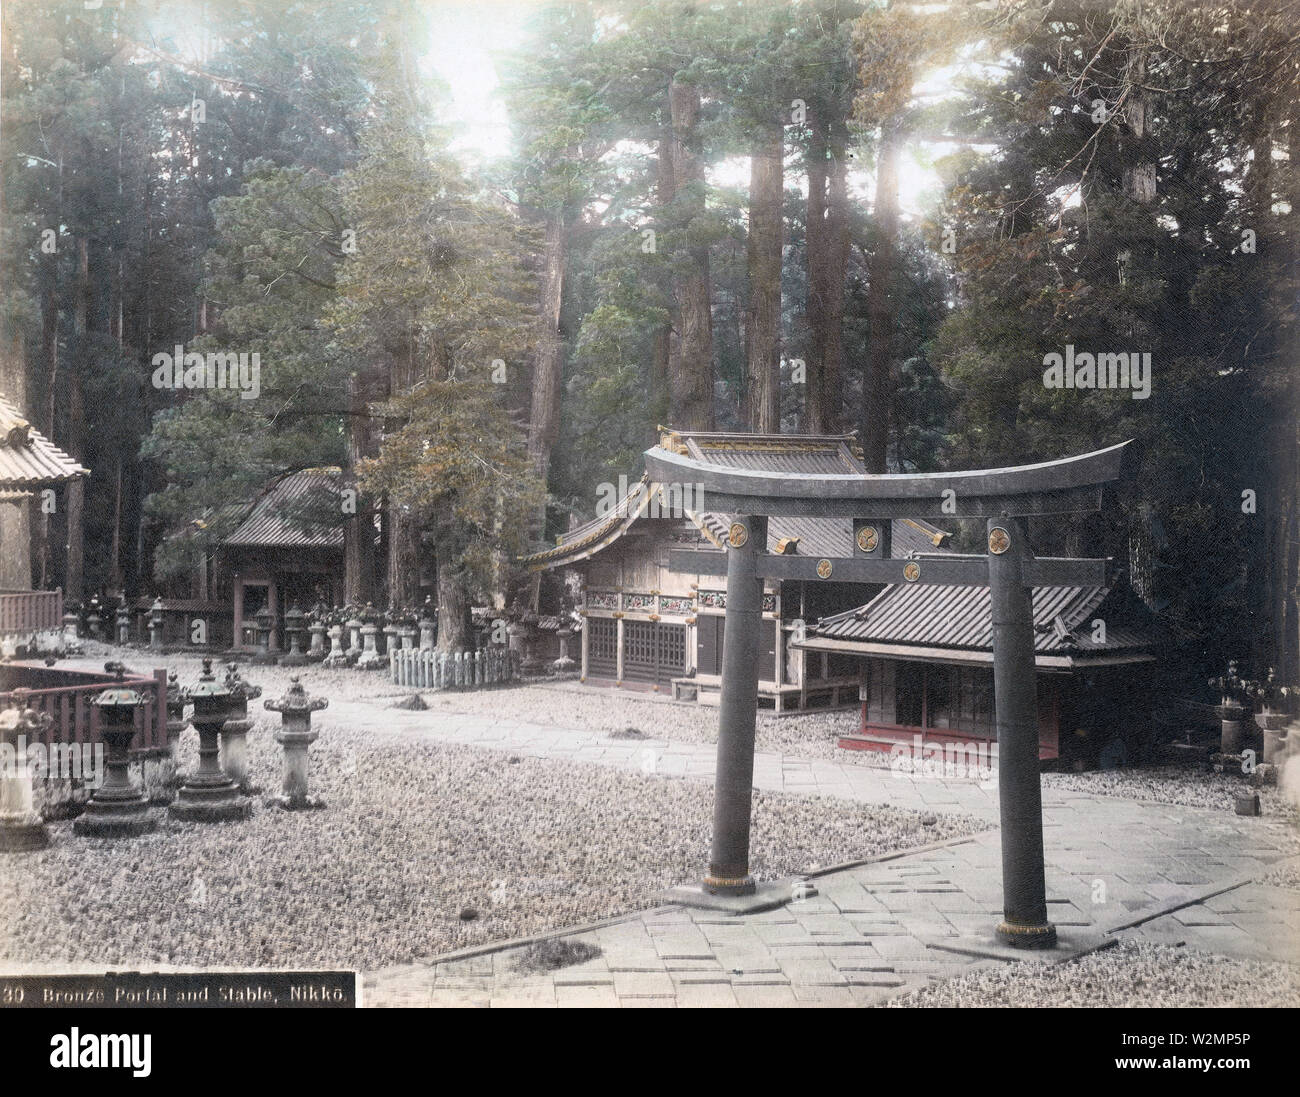 [ 1890s Japan - Sacred Bronze Torii Gate at Nikko ] —   The 6 meter high Karado Torii, the first bronze torii in Japan, as seen from the Yomeimon in Nikko.   The building in the center is Shinkyu, the stable for sacred horses and the only building of plain wood in Toshogu Shrine. The stable features 8 panels with carvings of monkeys, signifying the life of people. Monkeys were believed to be guardians of horses.  19th century vintage albumen photograph. Stock Photo